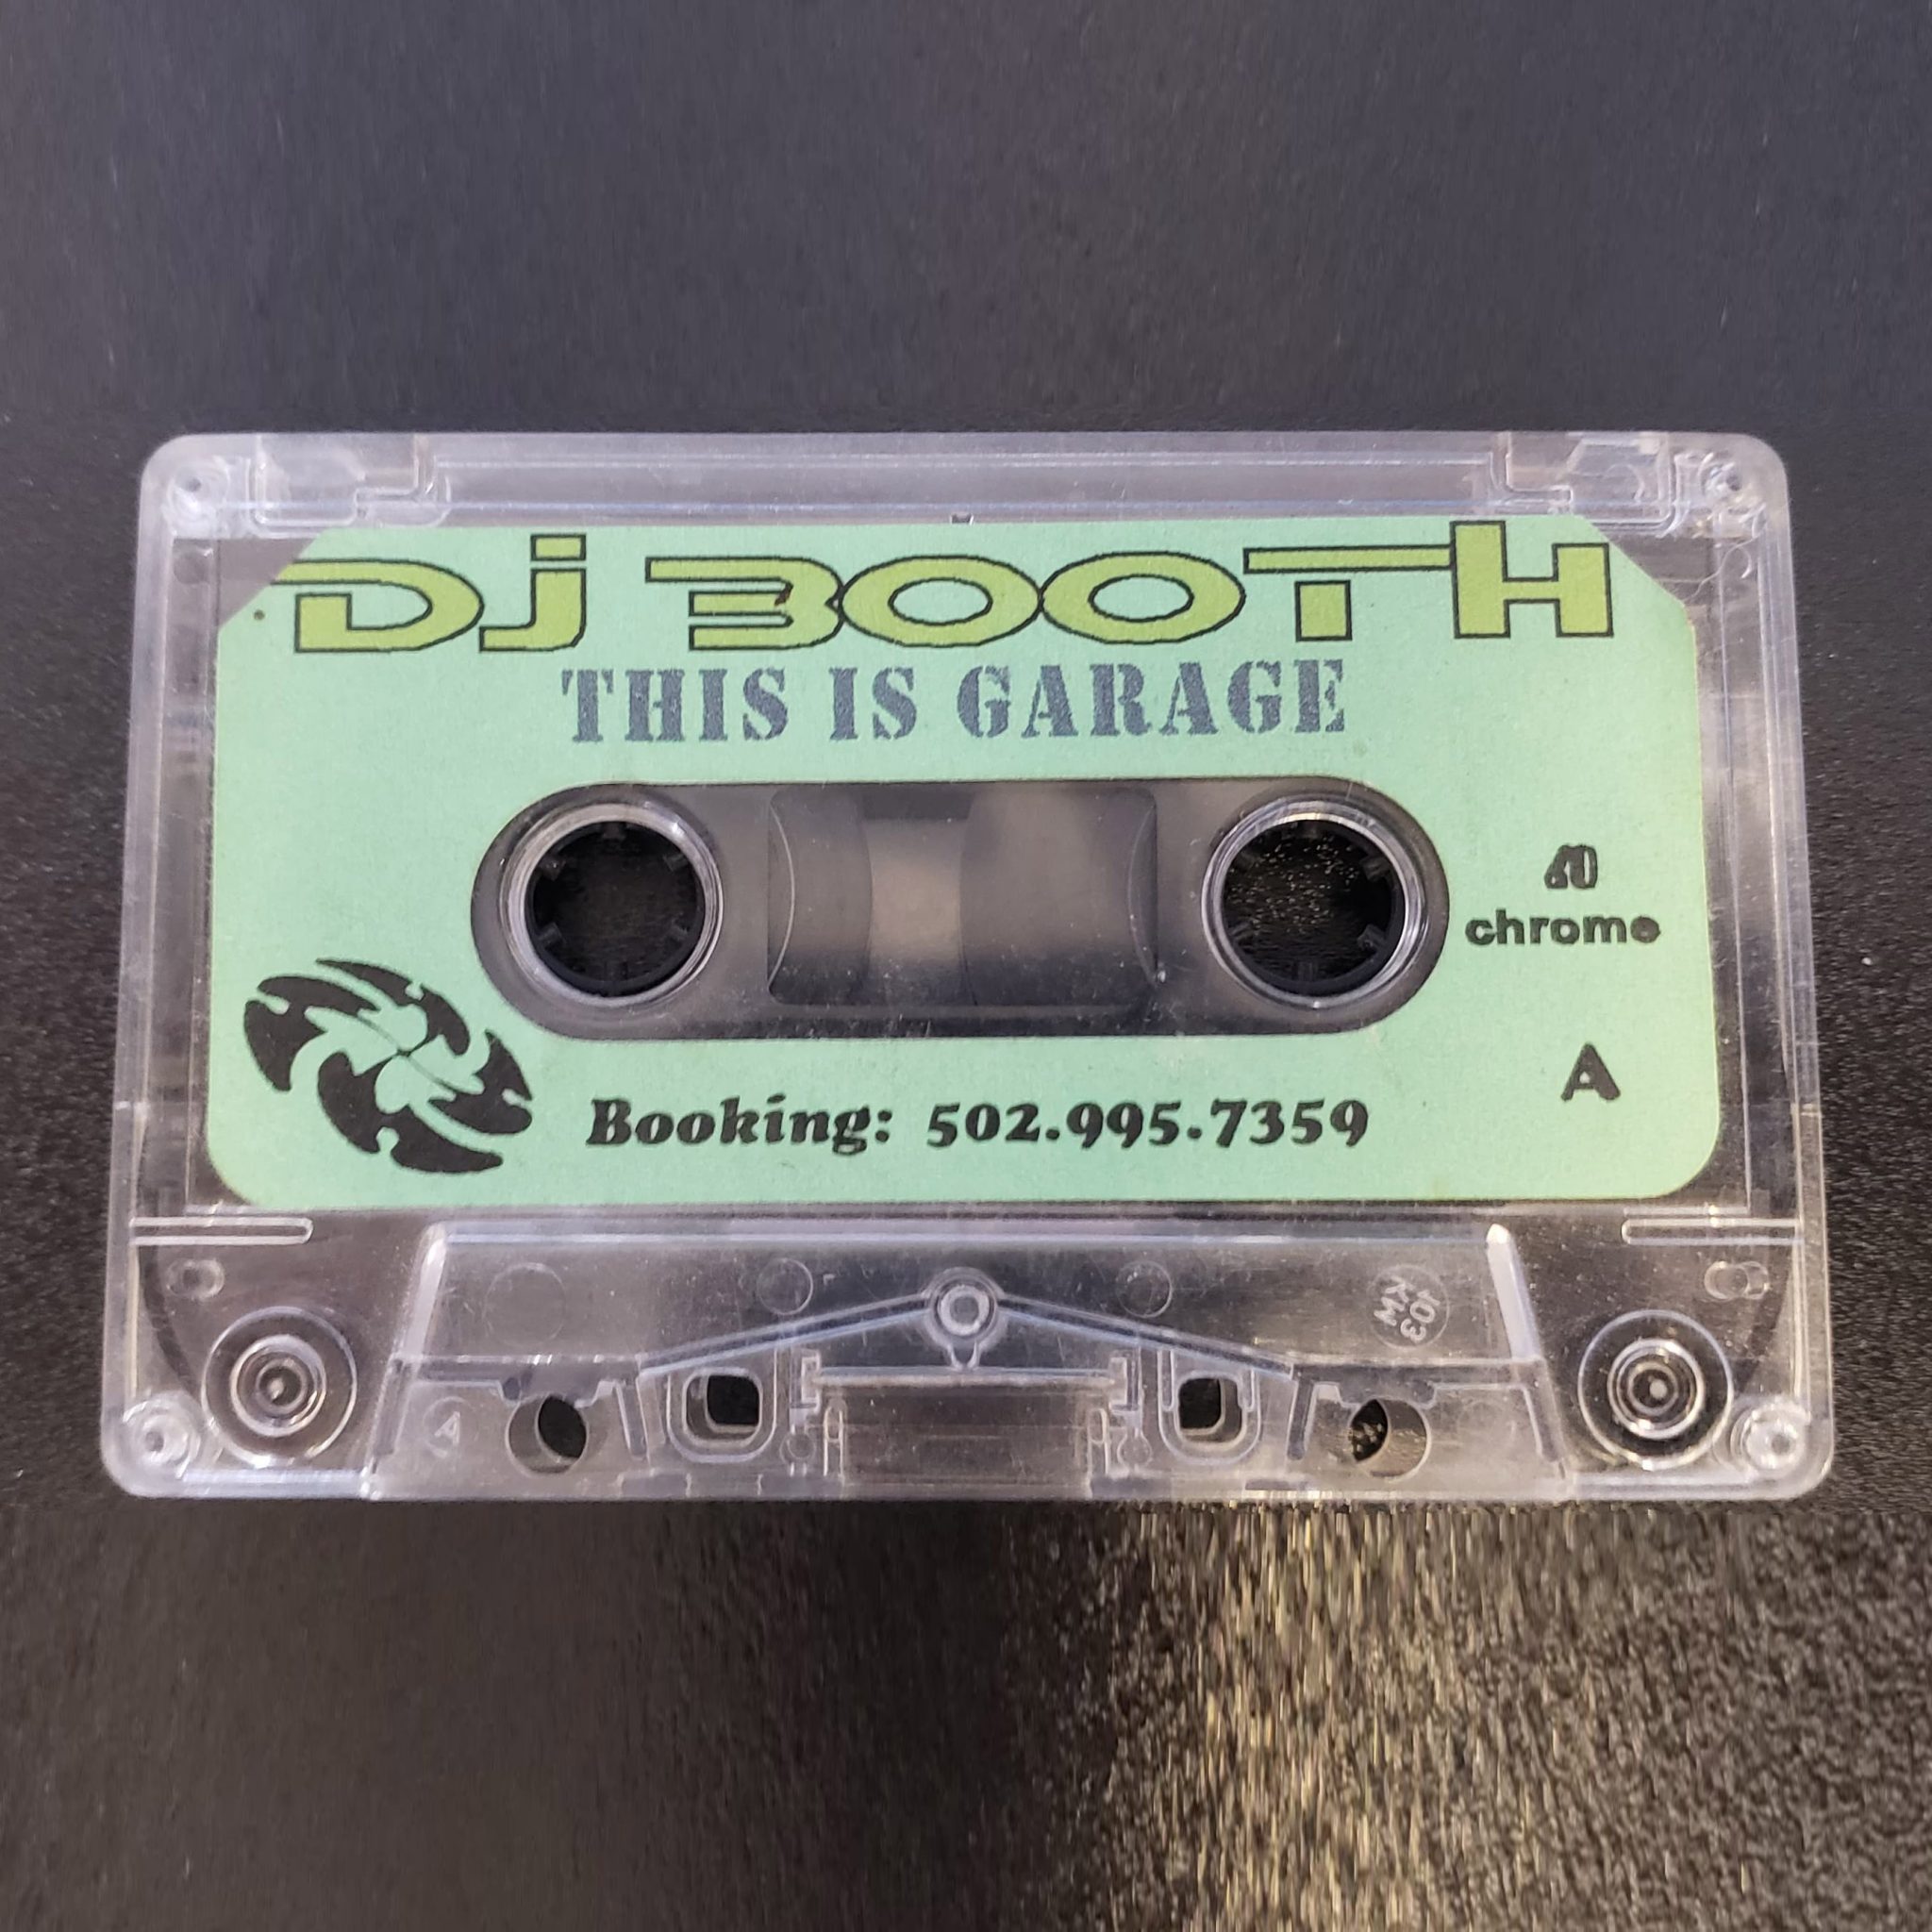 DJ Booth – This Is Garage